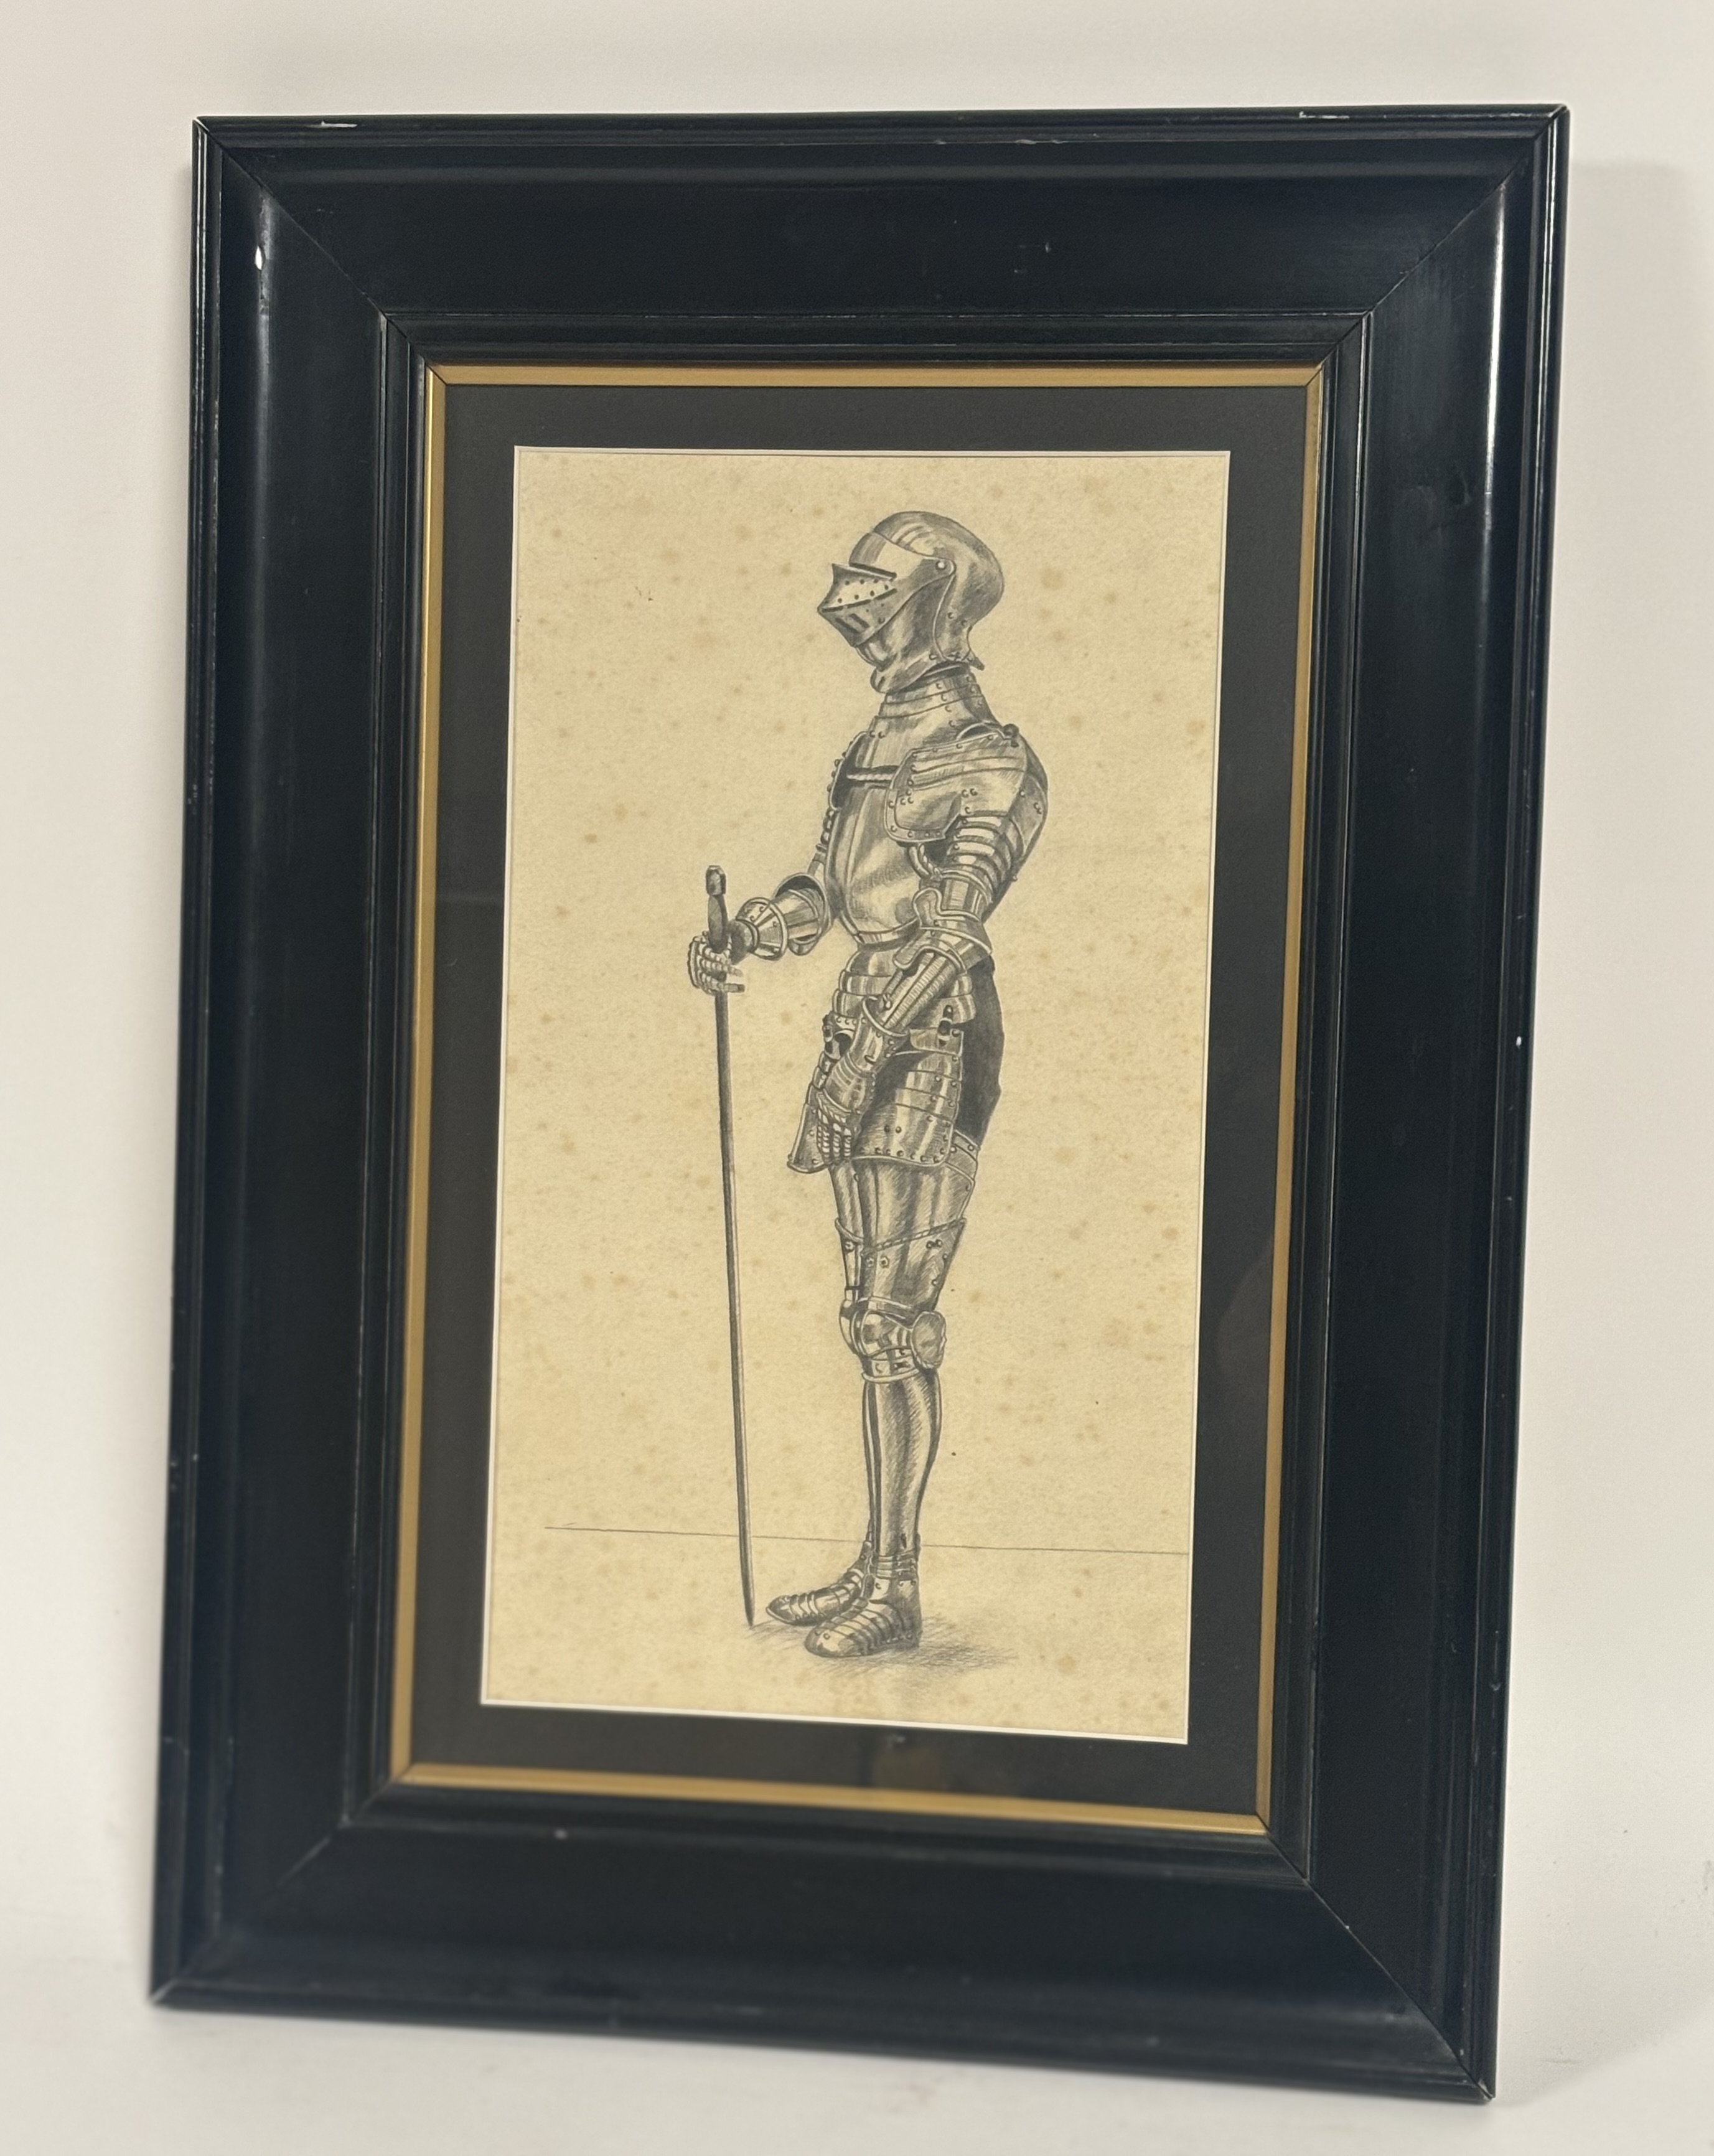 An Early 20thc School, A Knight in Full Armour, pencil, unsigned, framed. (34cmx19.5cm)